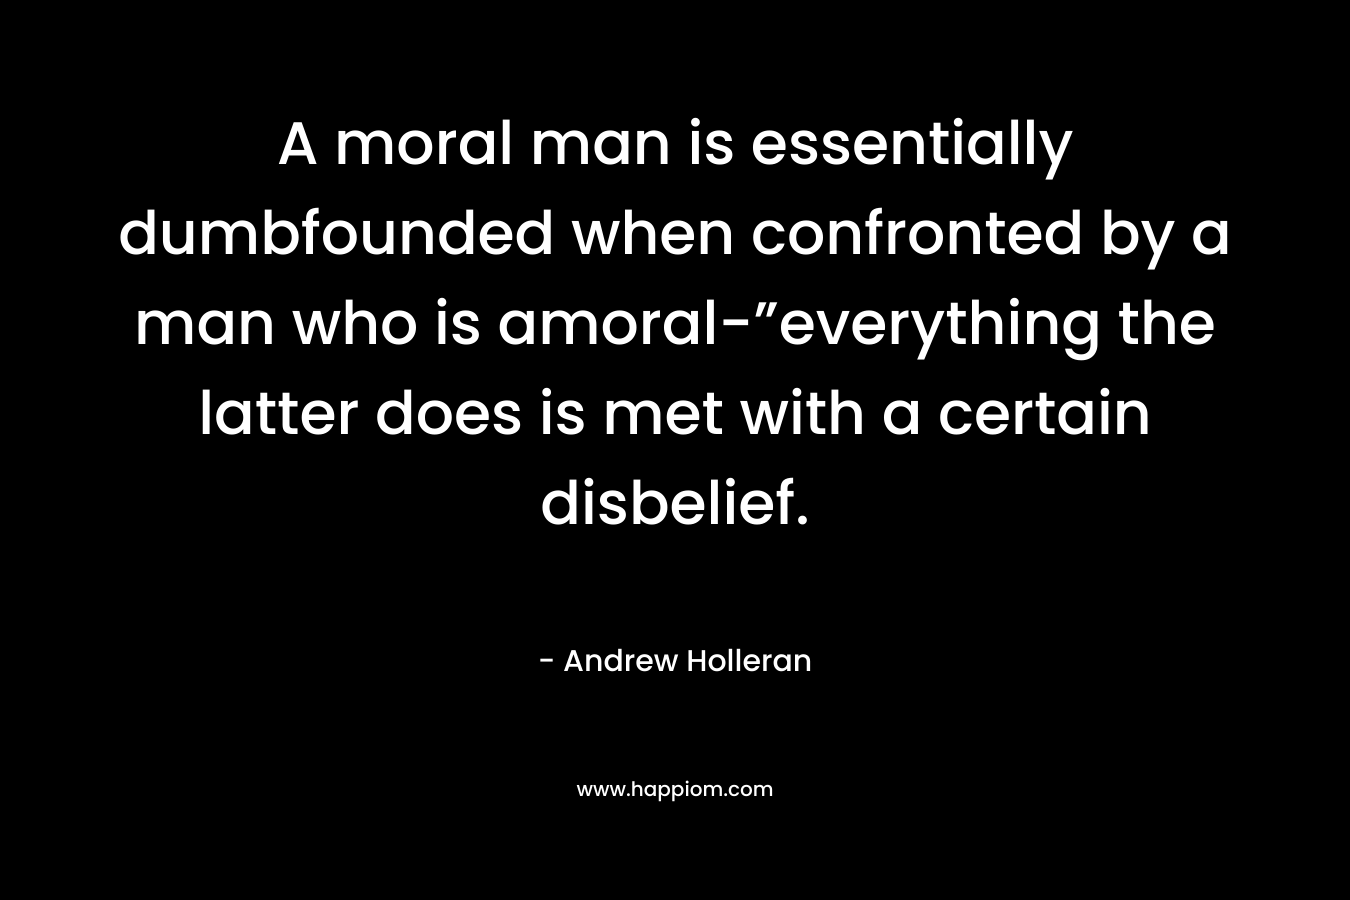 A moral man is essentially dumbfounded when confronted by a man who is amoral-”everything the latter does is met with a certain disbelief.